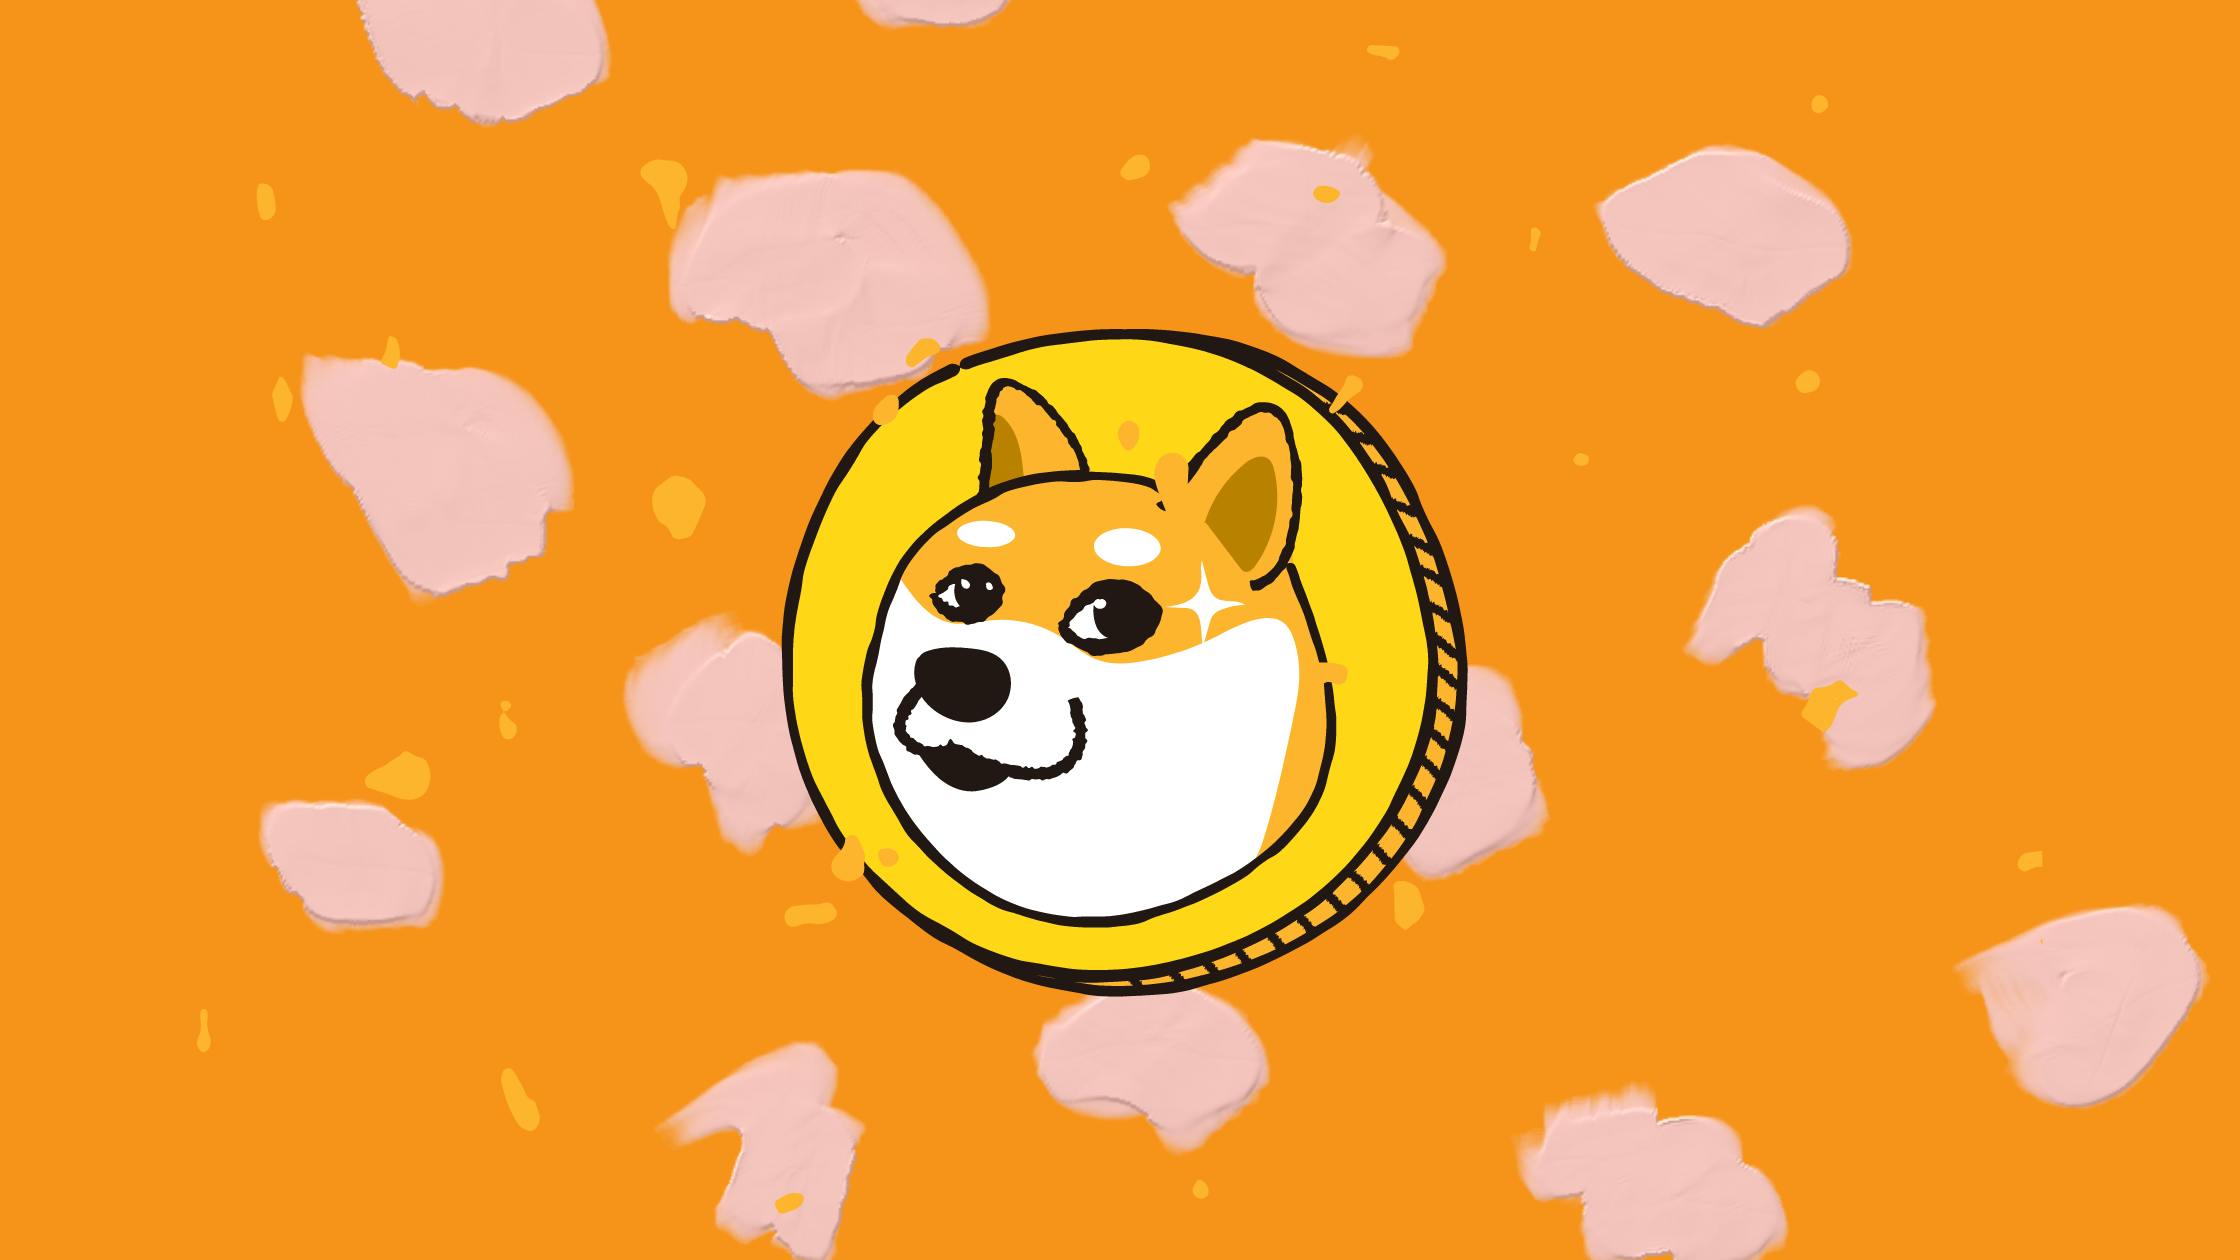 Here's How This Crypto Winter Will Influence Crypto Community: Dogecoin Co-Founder